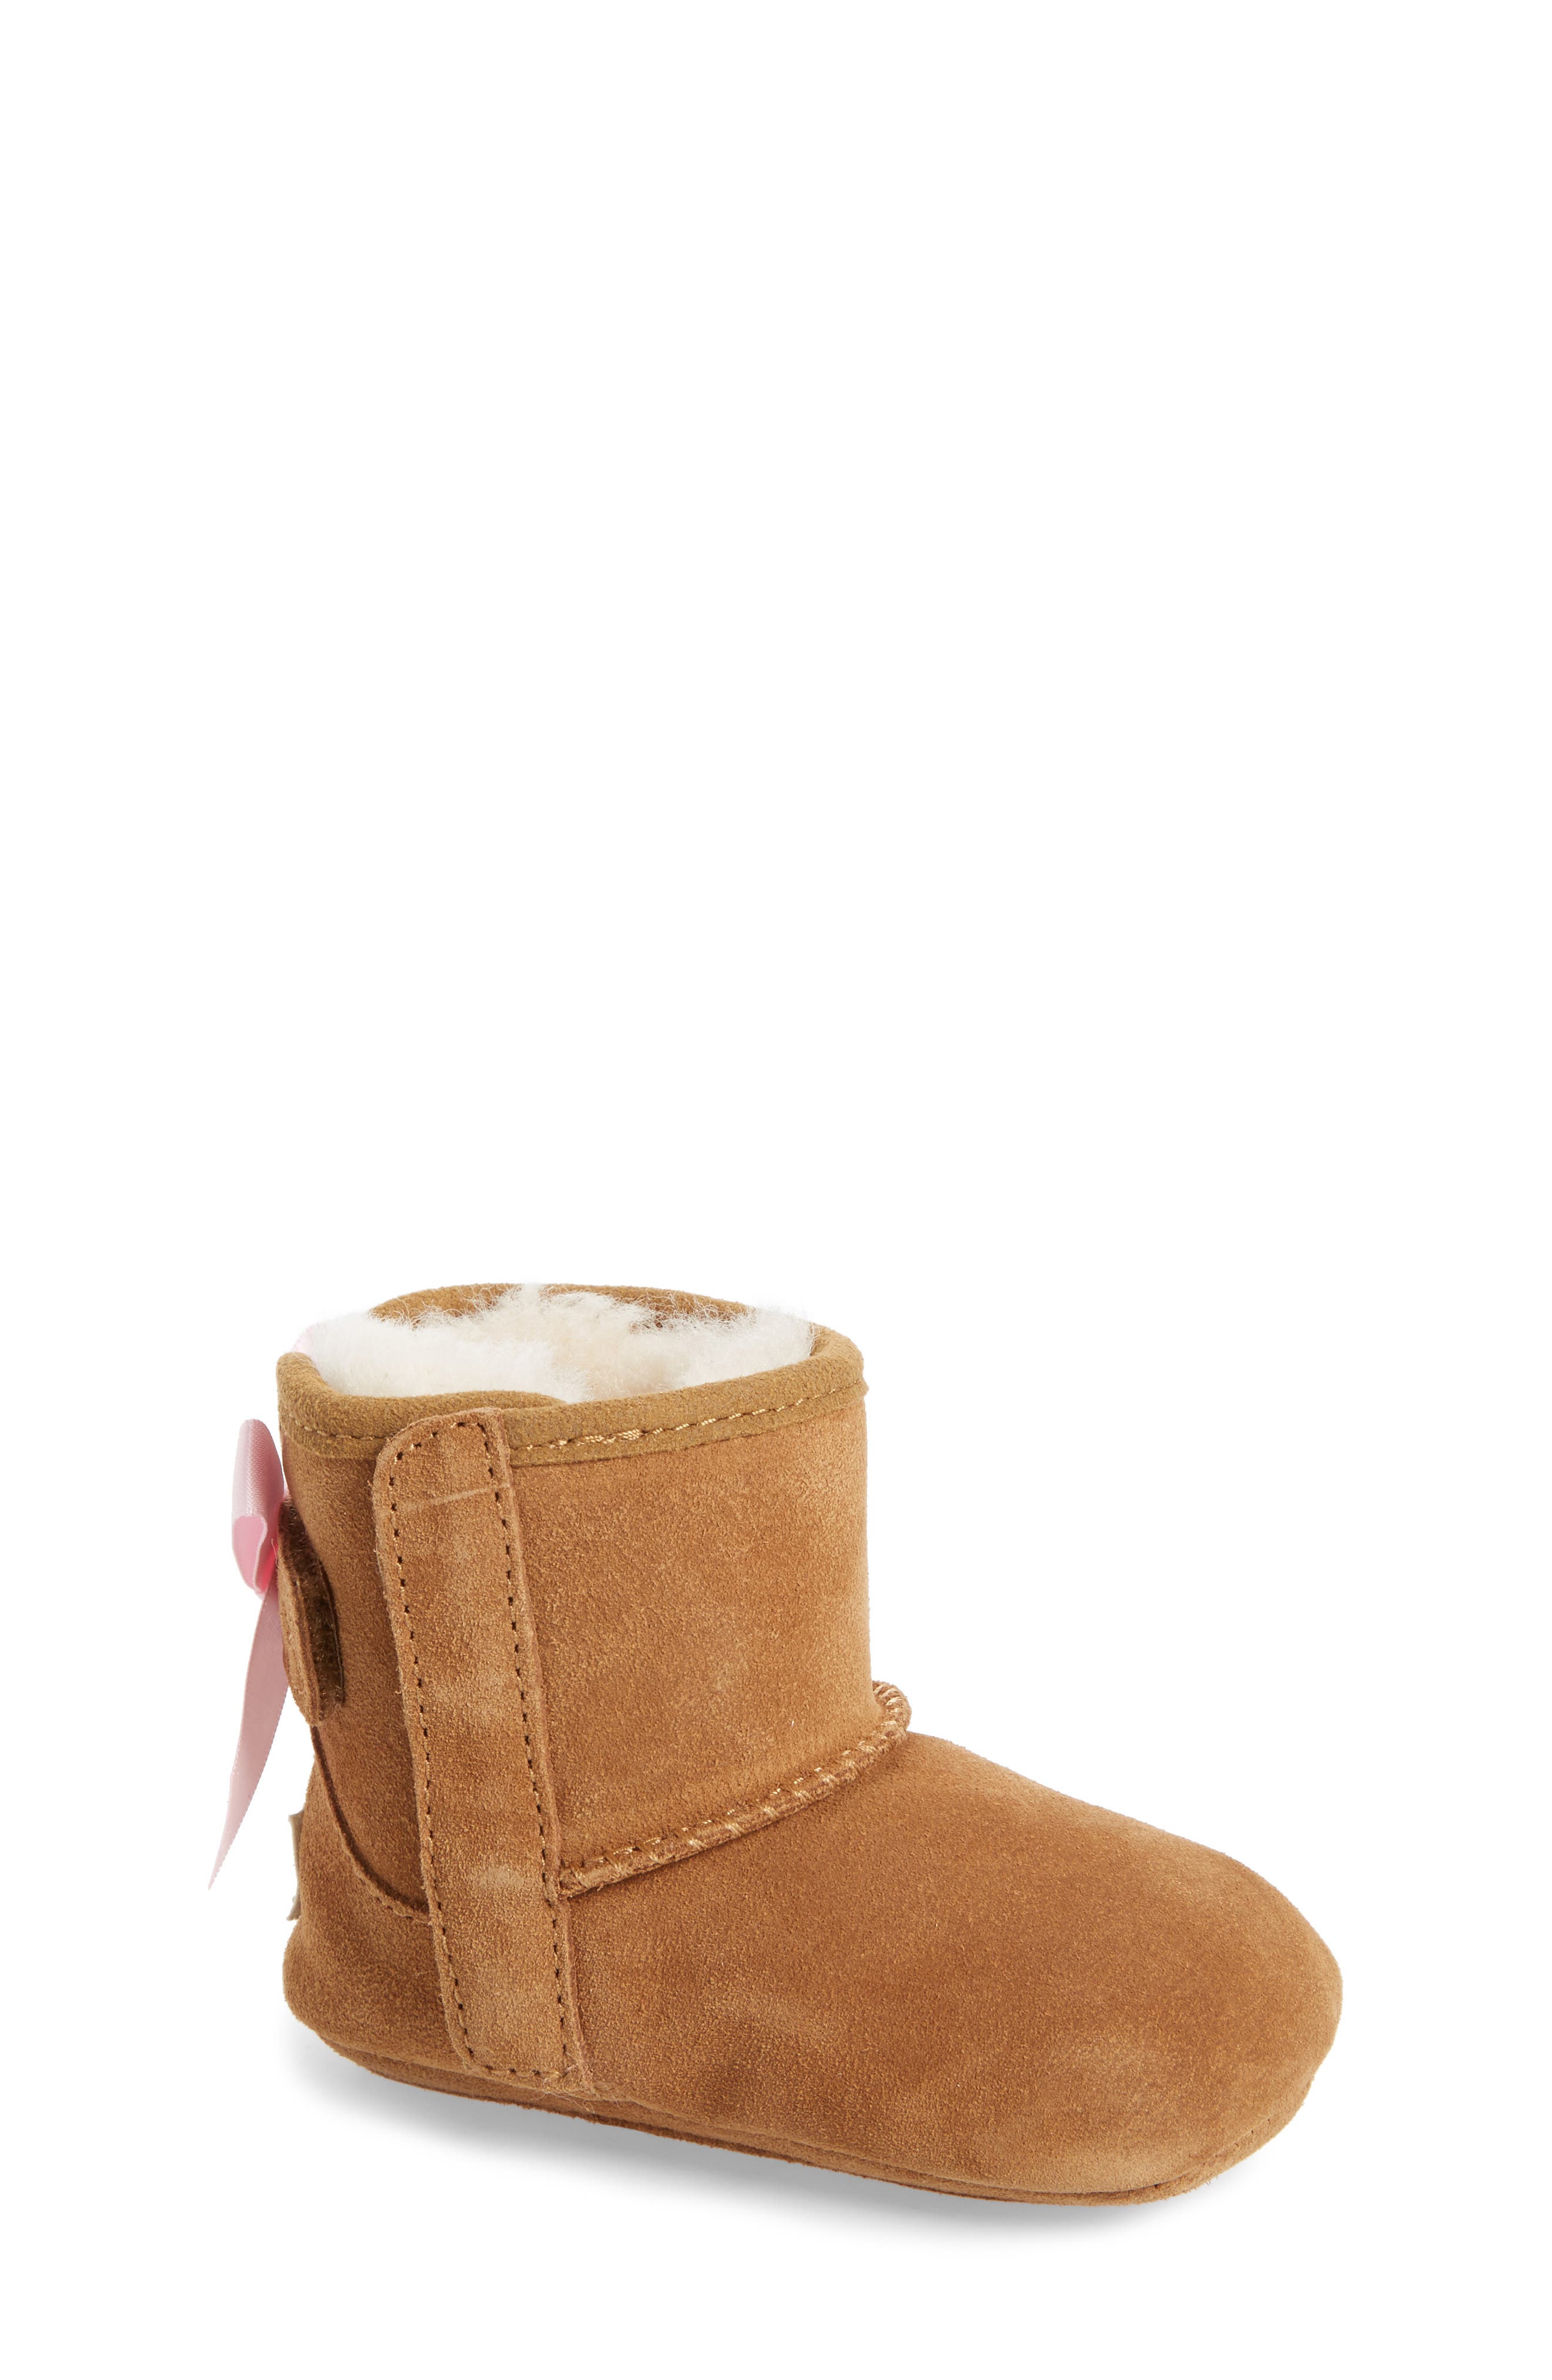 toddler uggs sale